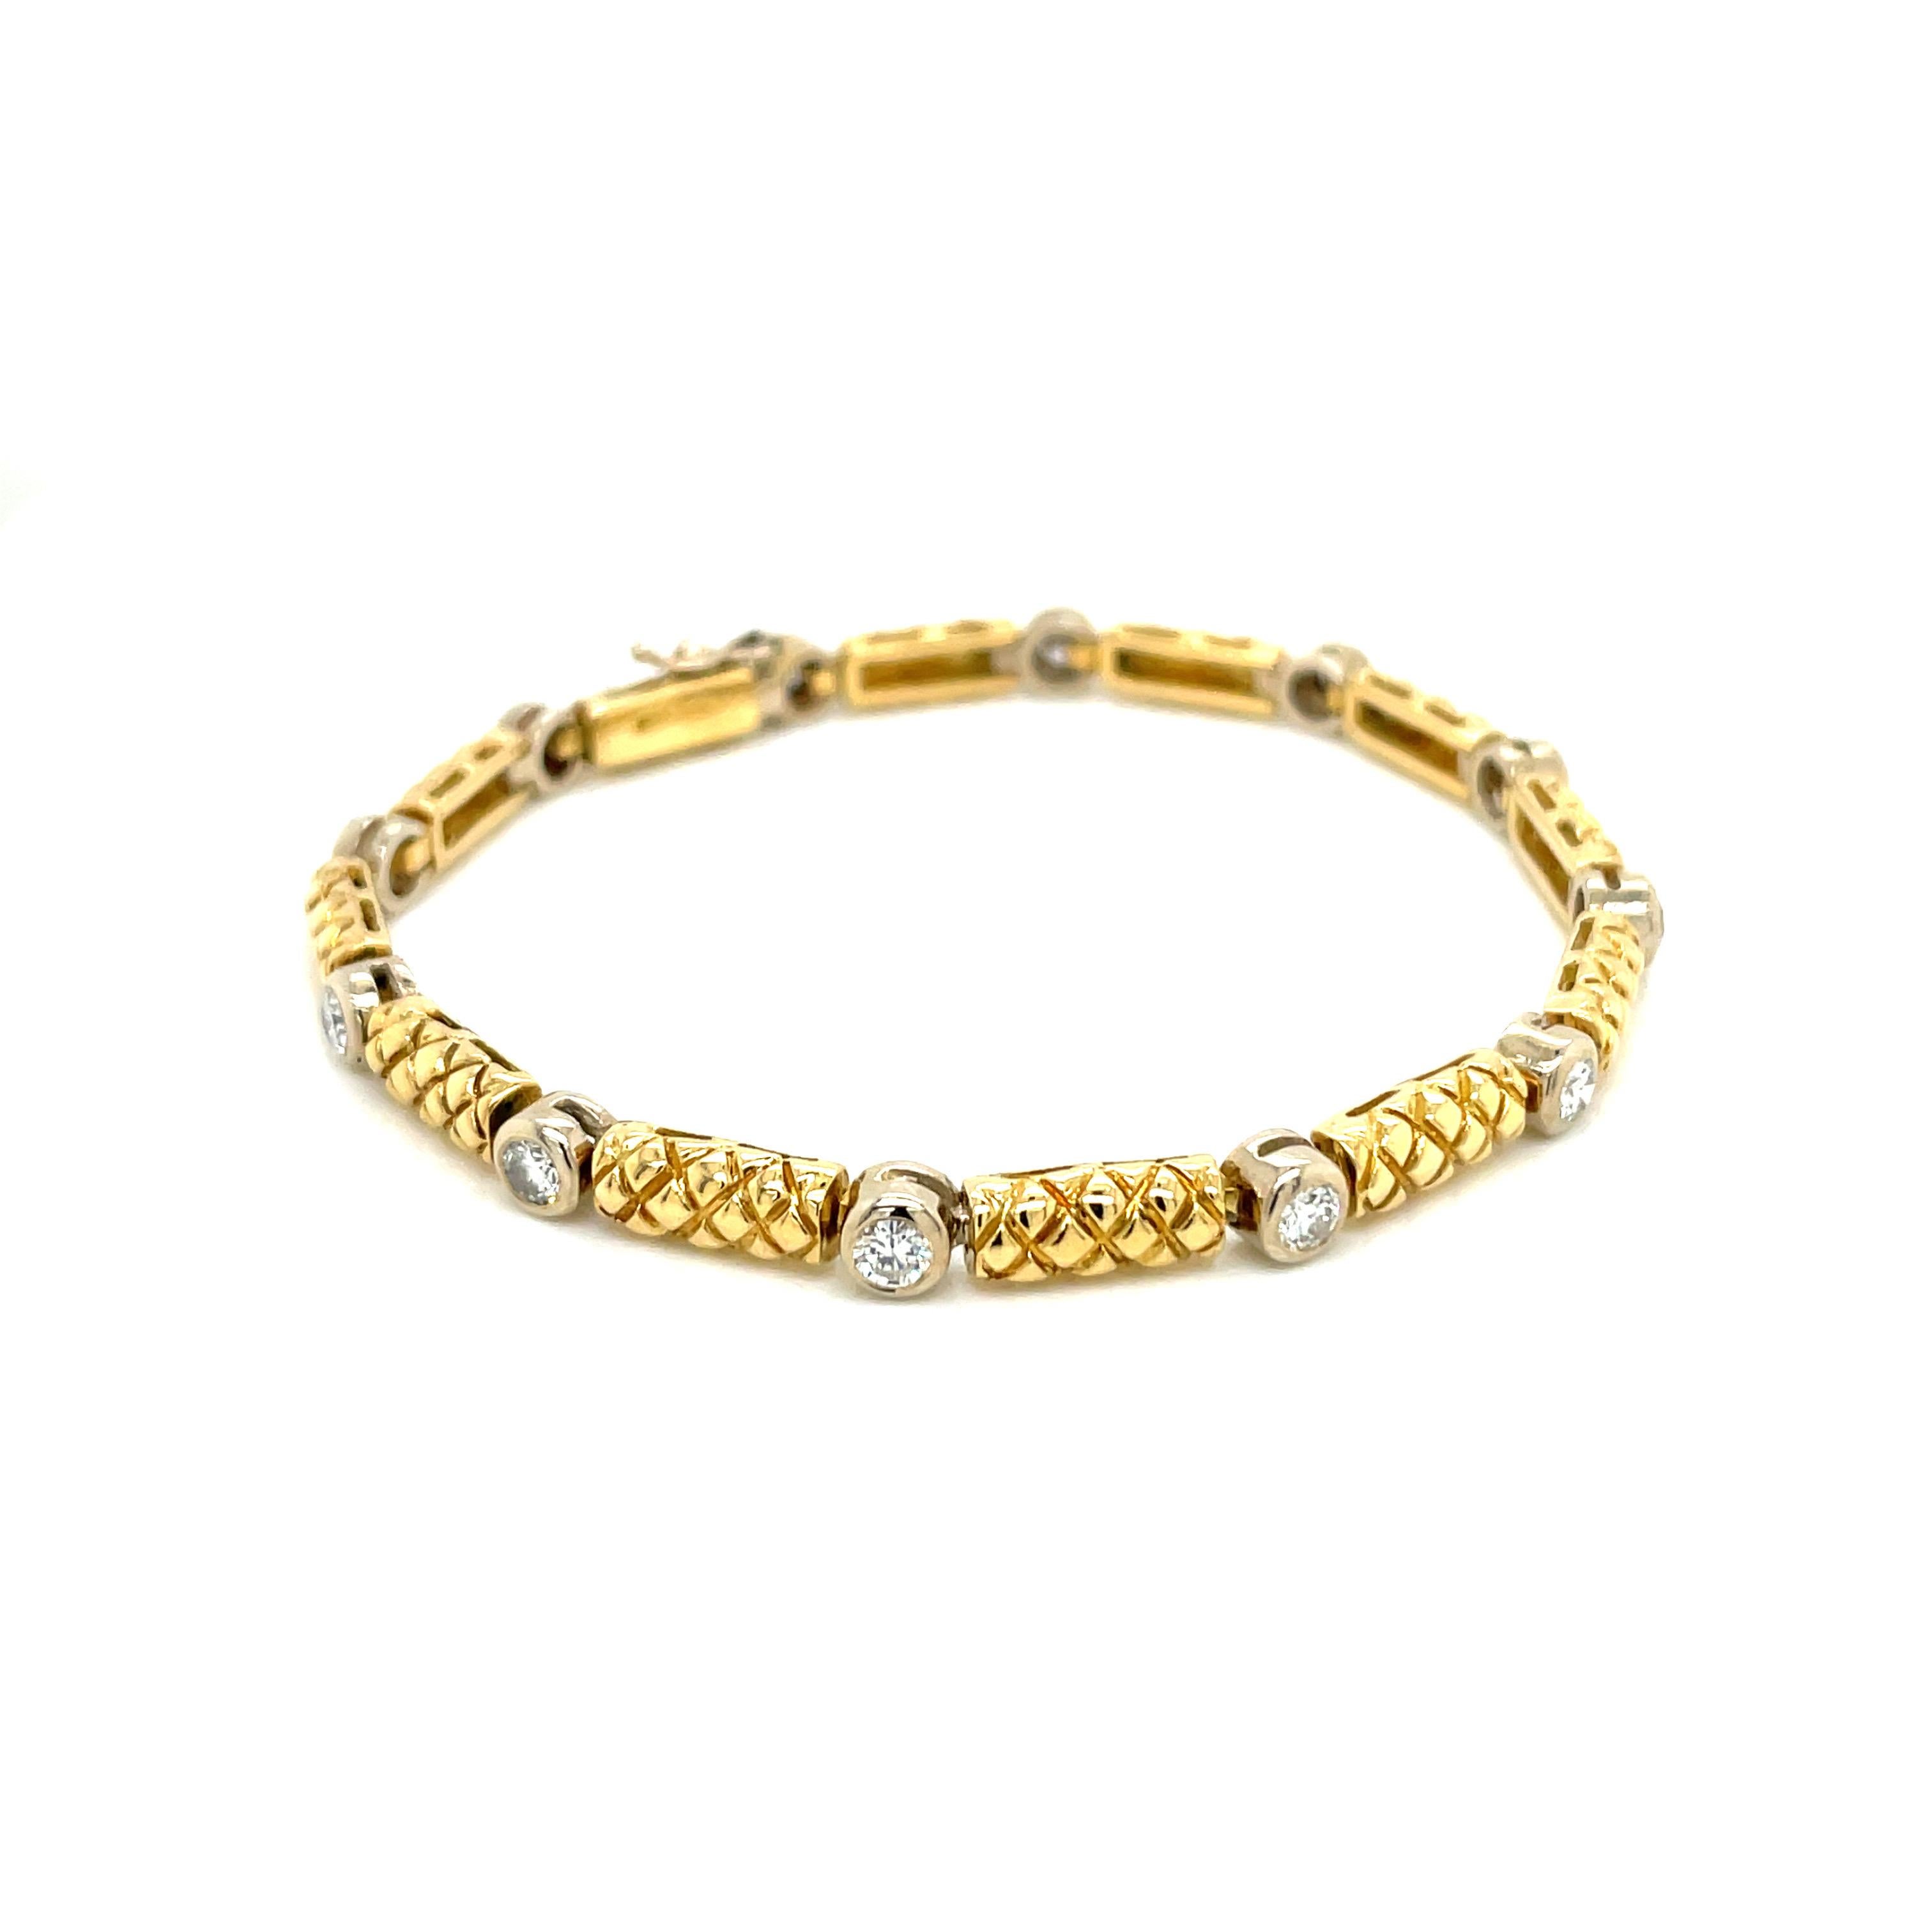 Vintage 18k yellow gold Link and Diamond Bracelet. The 18k solid gold link bracelet has a textured design. There are 12 round brilliant diamonds set in 18k white gold bezels and weigh approximately 2.00ct total weight. The diamond quality is G - H